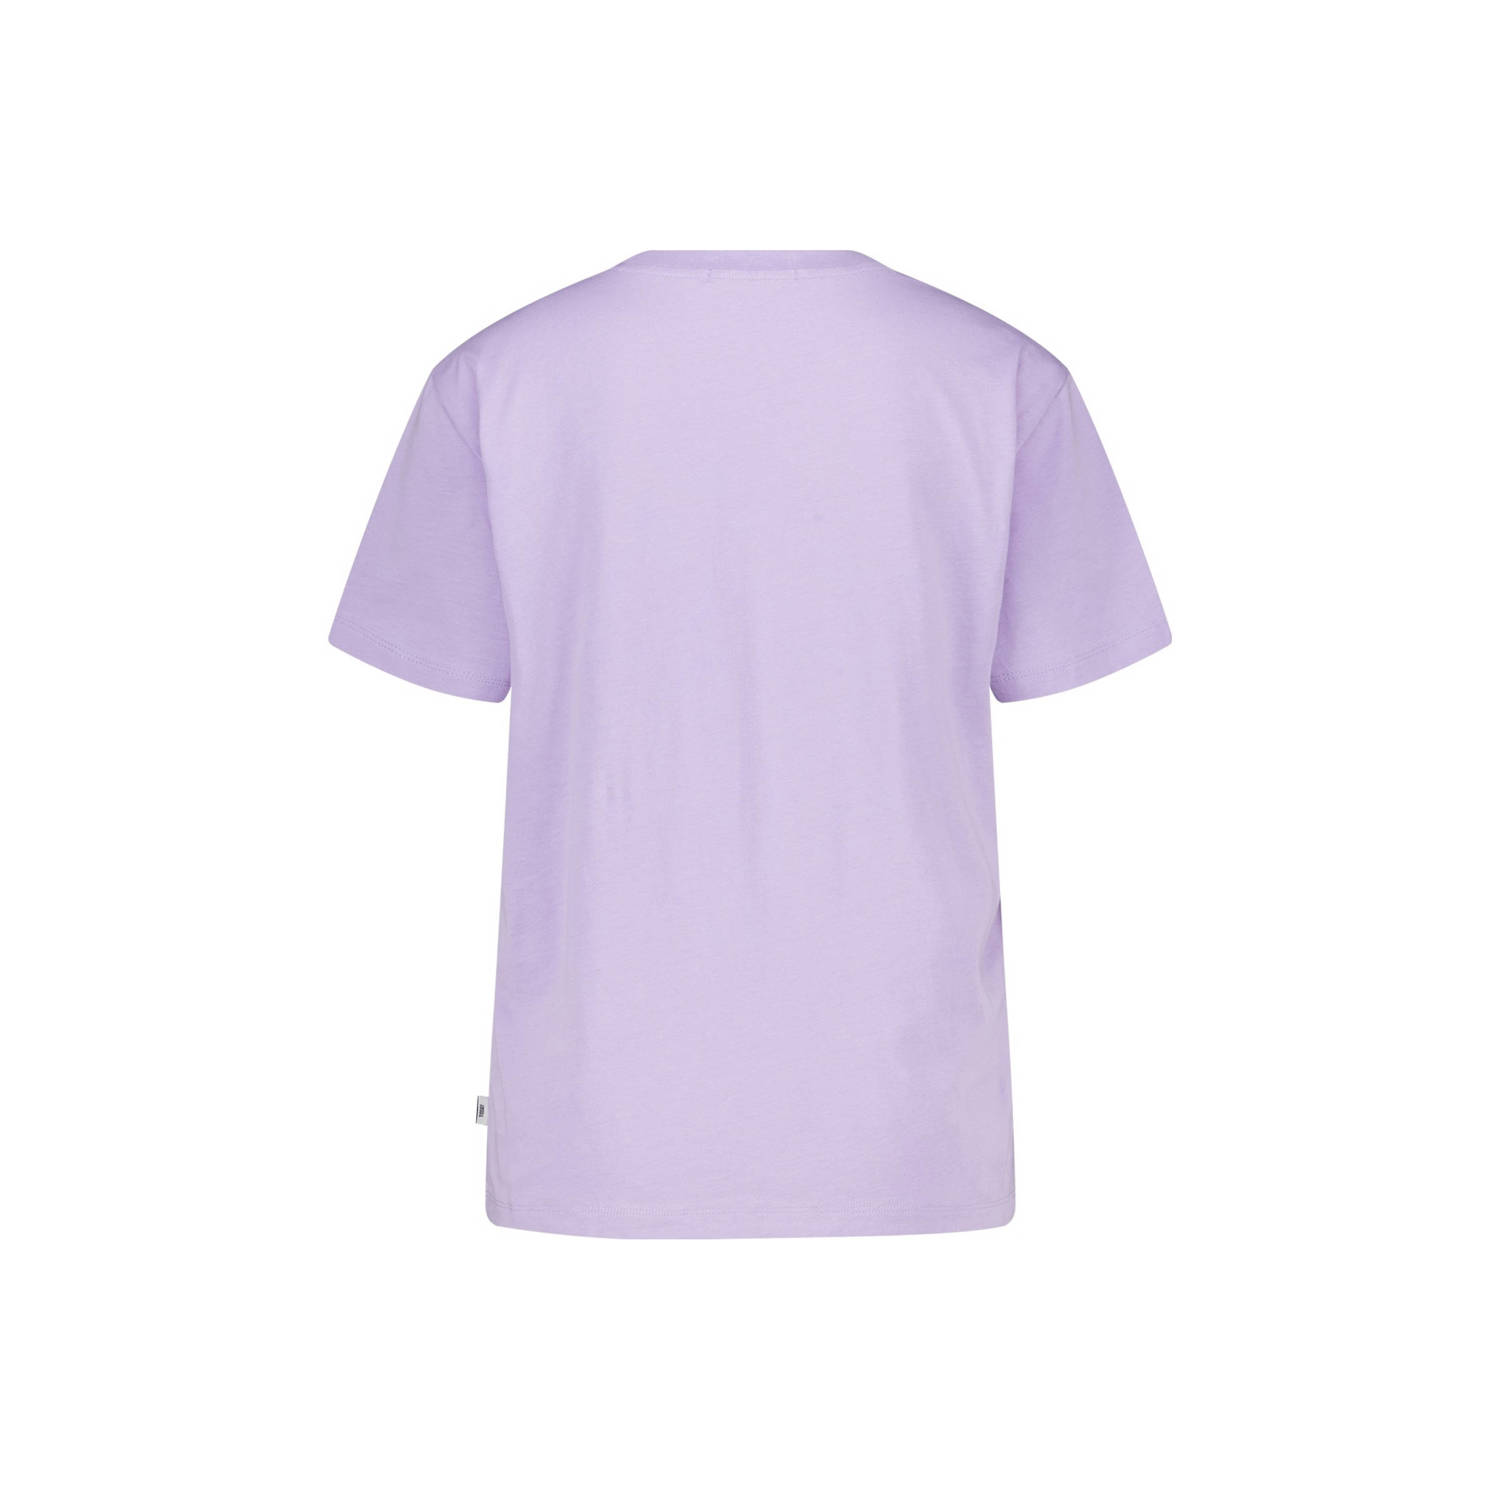 America Today T-shirt Esther lilac purple